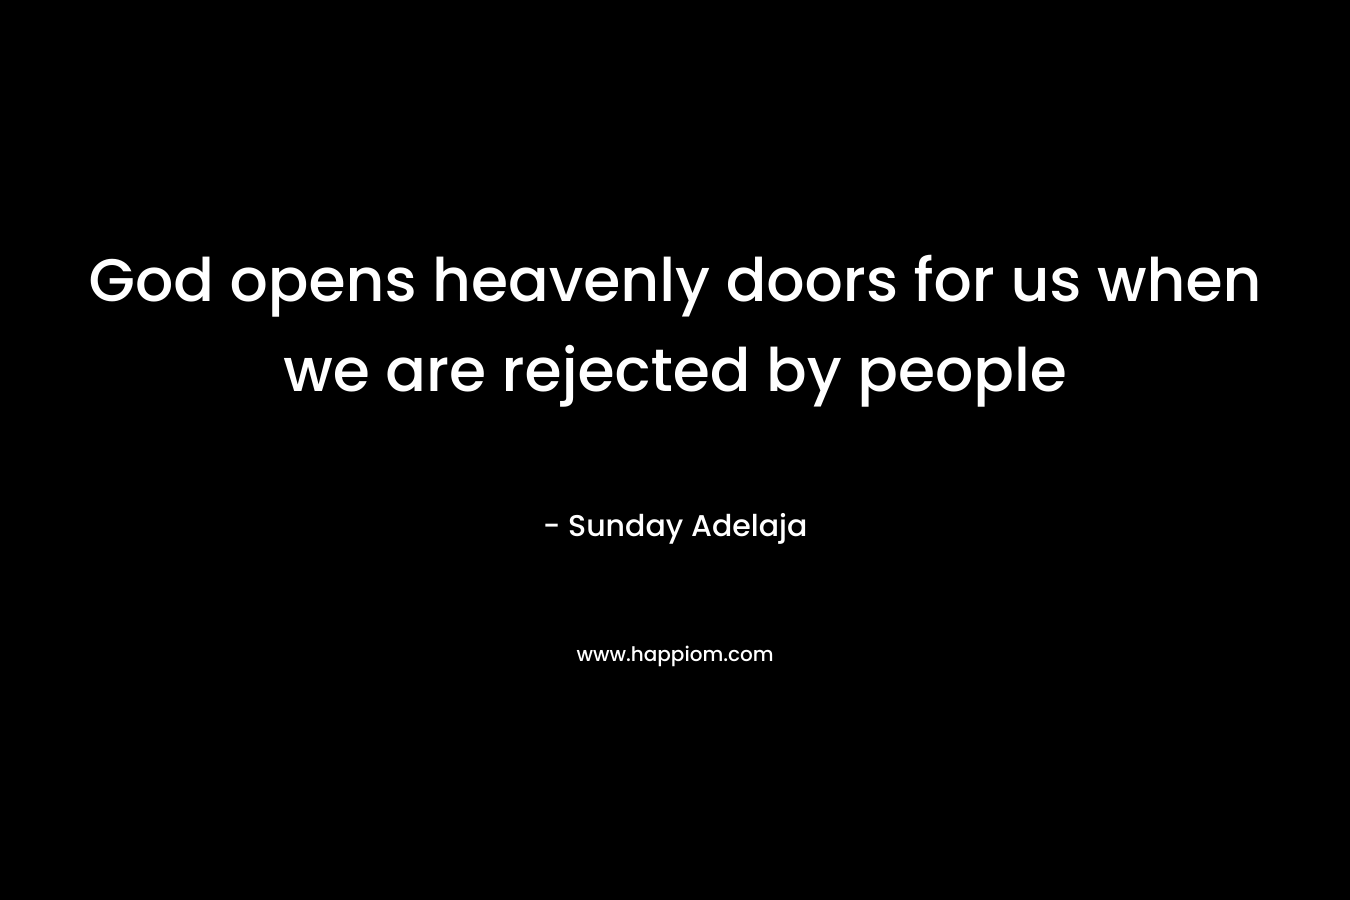 God opens heavenly doors for us when we are rejected by people